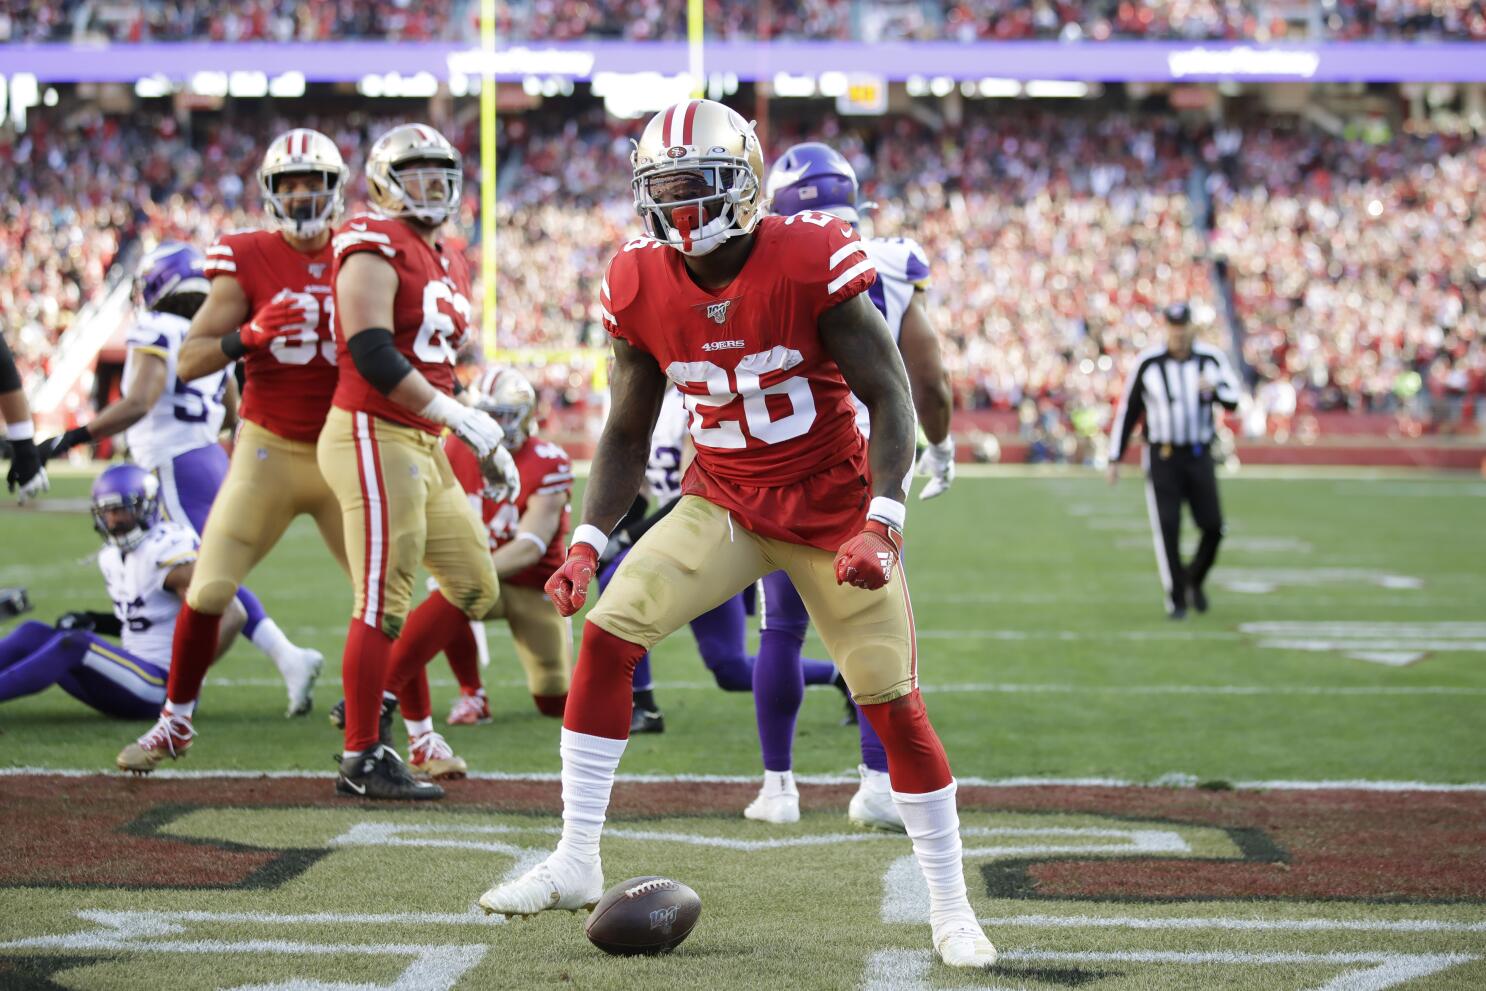 The 49ers are NFC West champions after dominant defensive effort